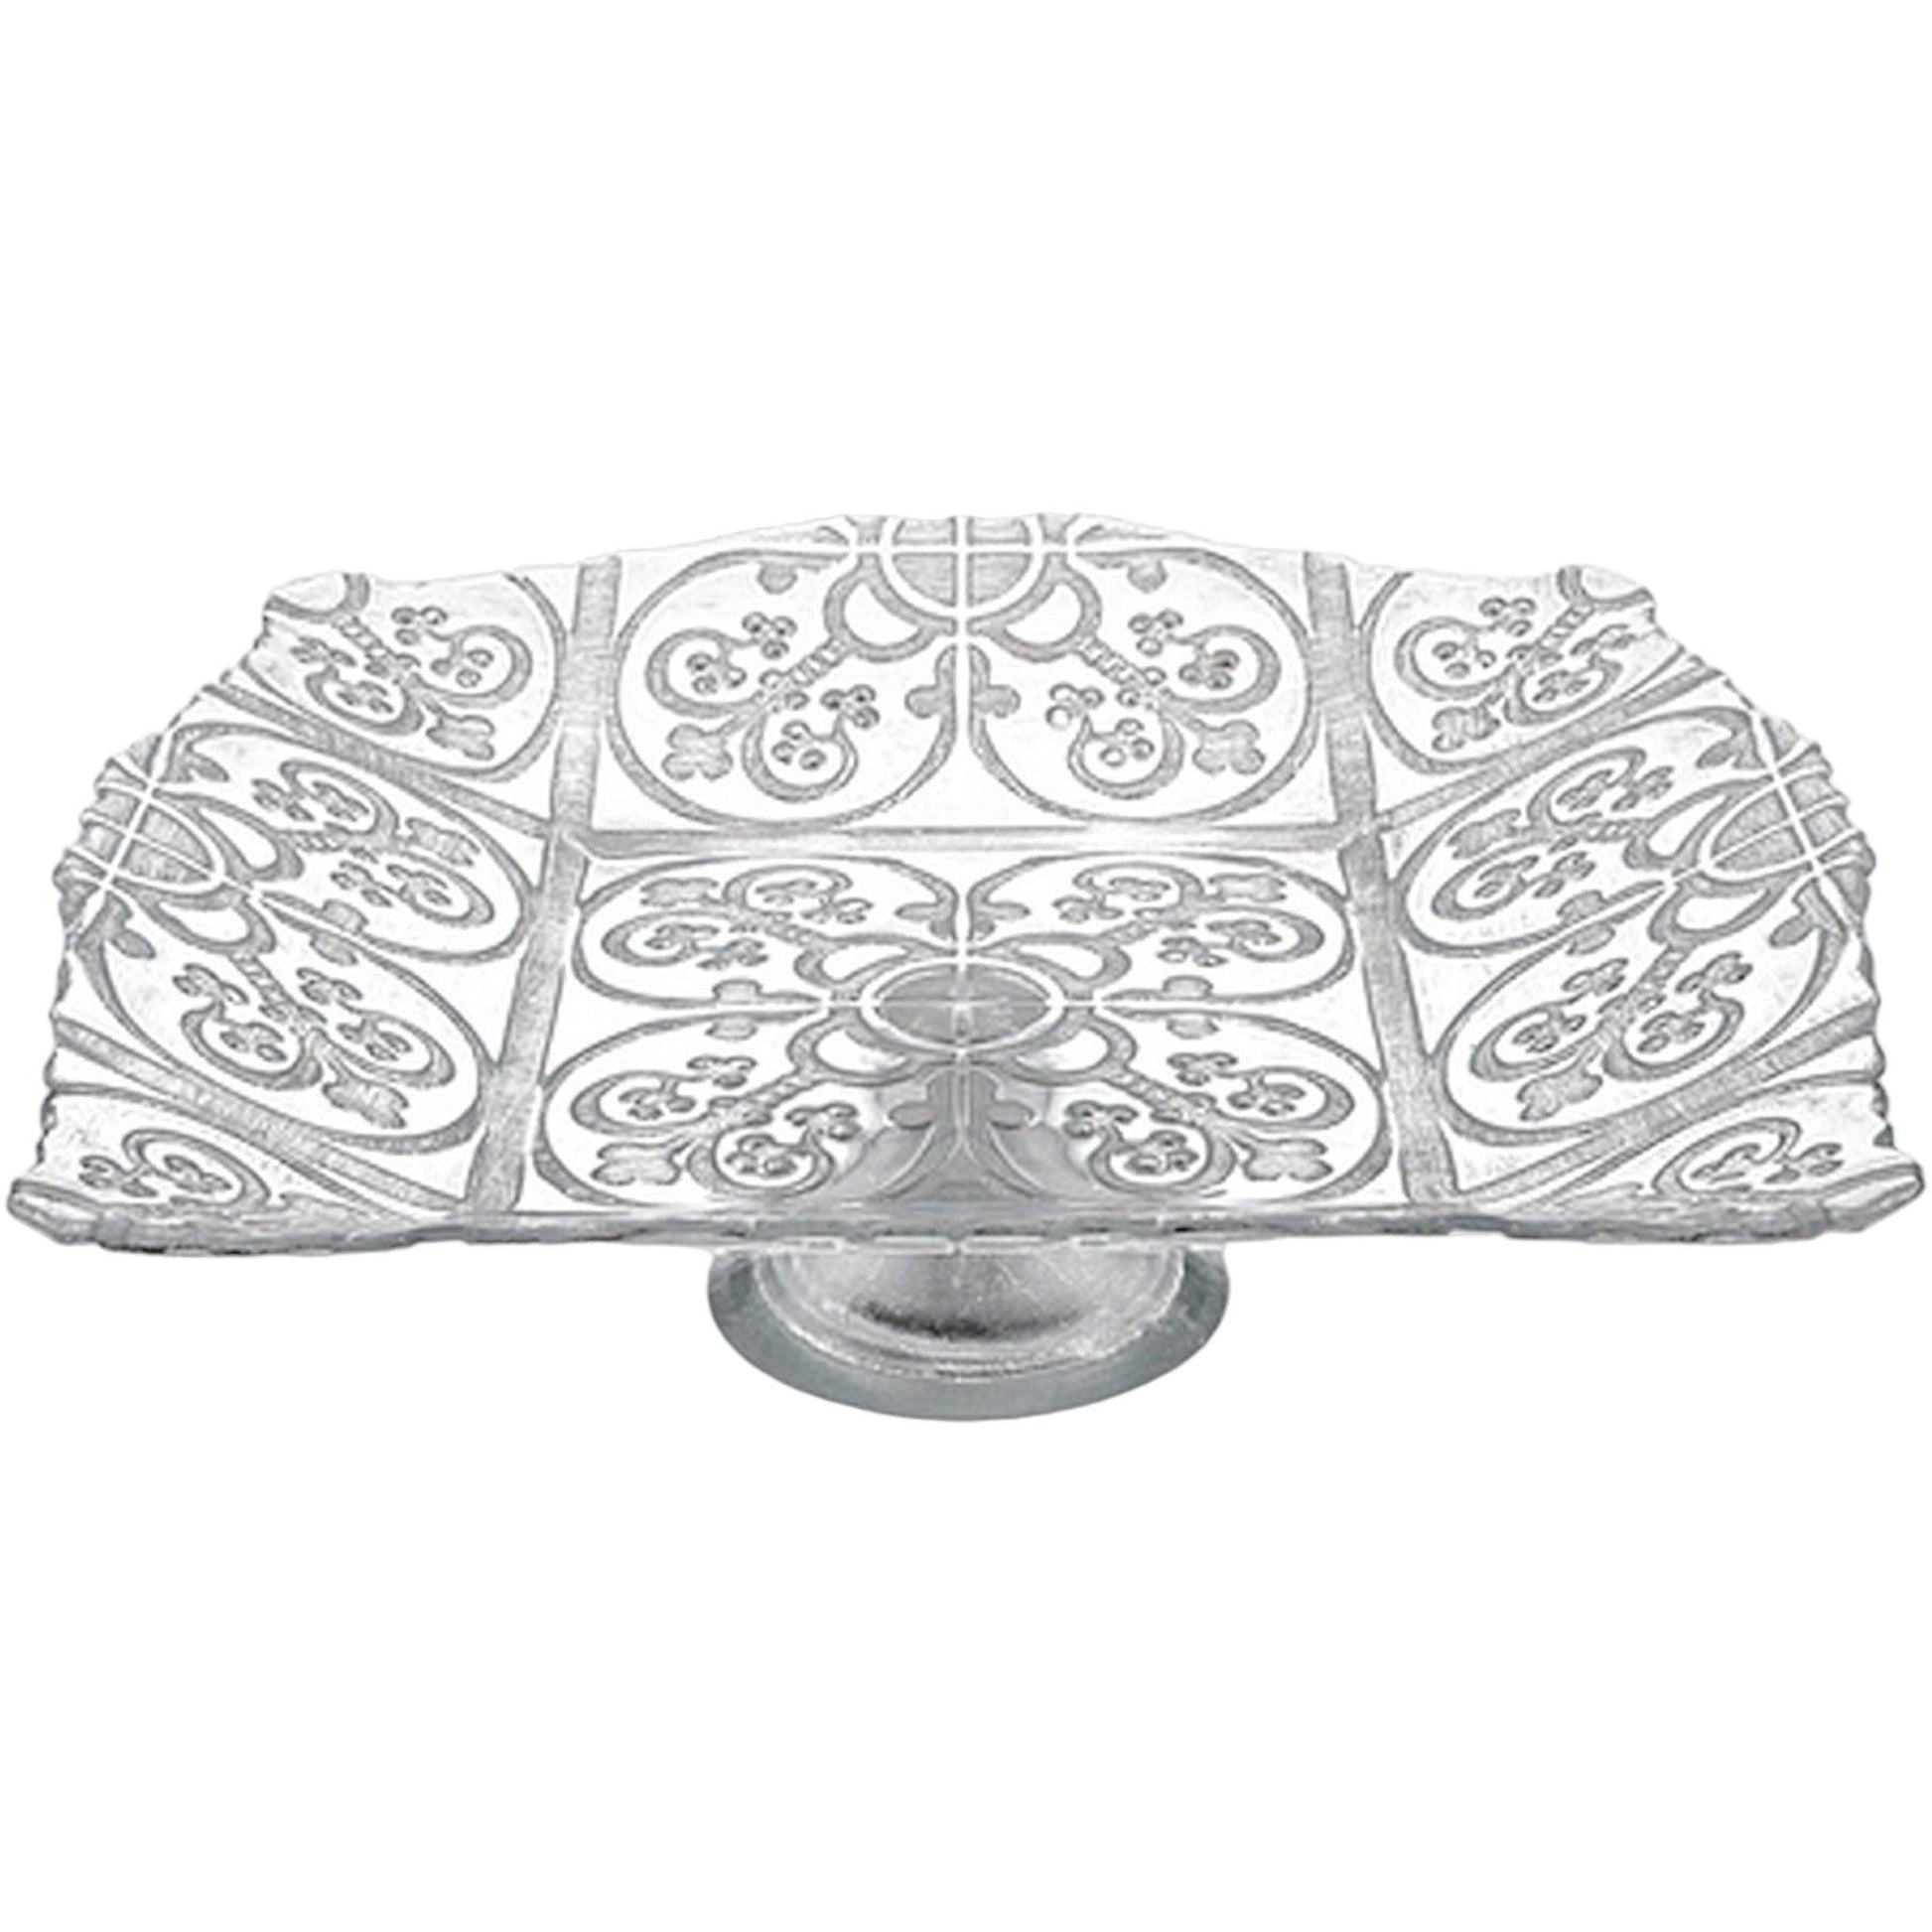 Guinnevere Silver Serving Dish - 12 inch Party Tray - Nature Home Decor